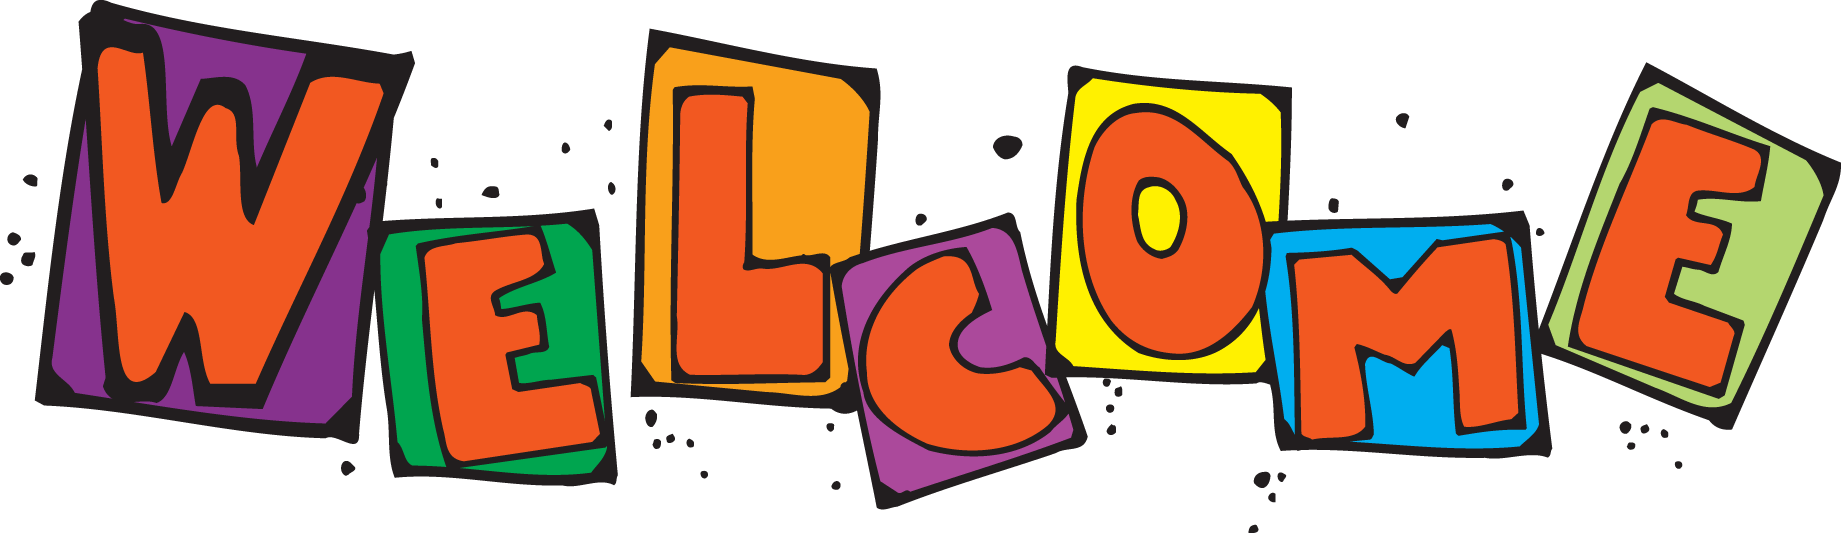 Welcome Animated Clip Art   Clipart Best